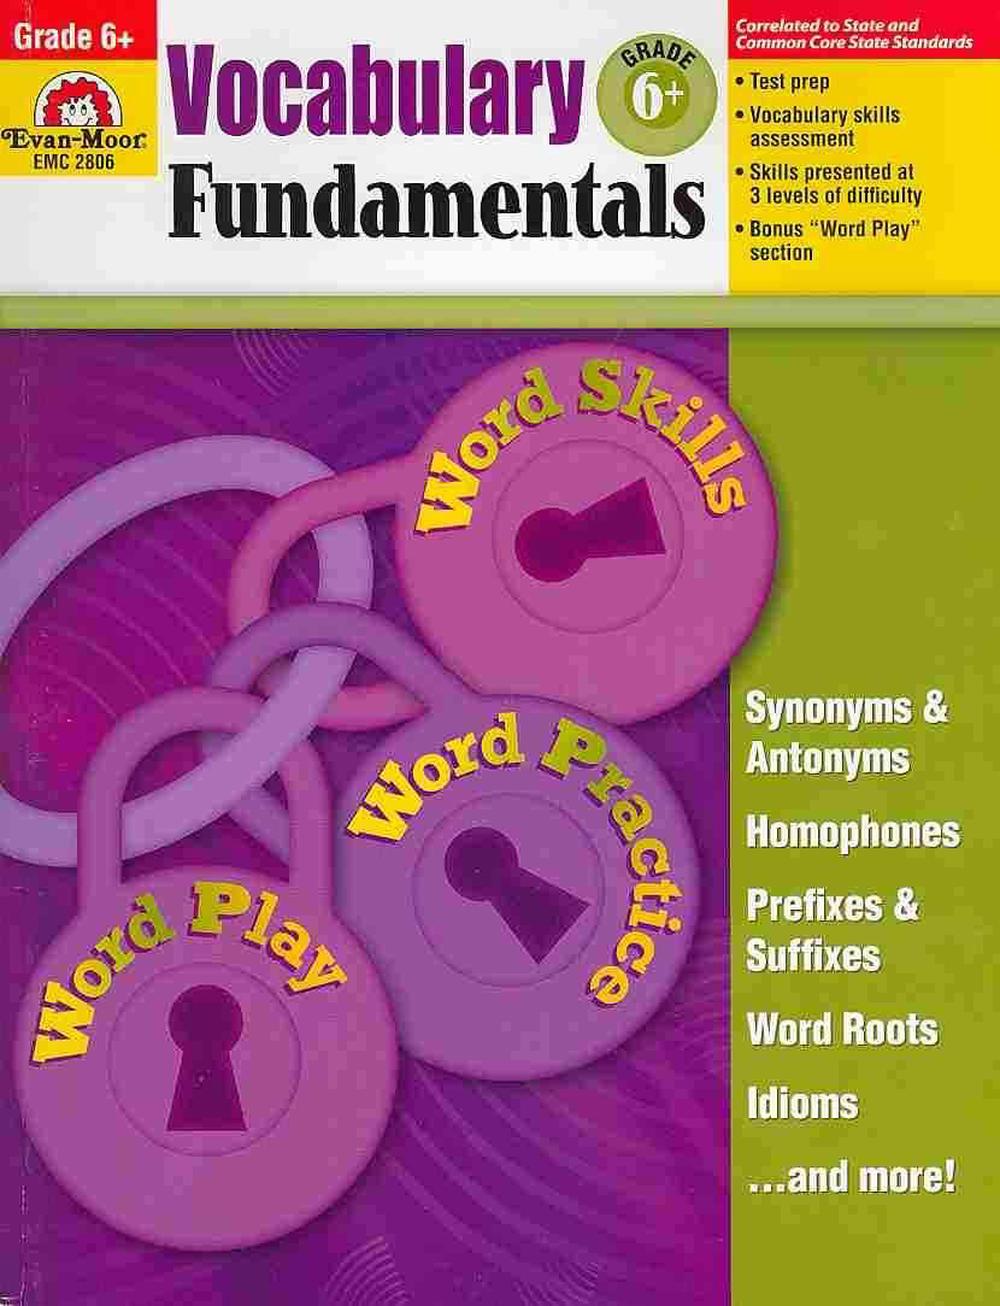 Vocabulary Fundamentals, Grade 6 by EvanMoor Educational Publishers (English) P 9781608236633